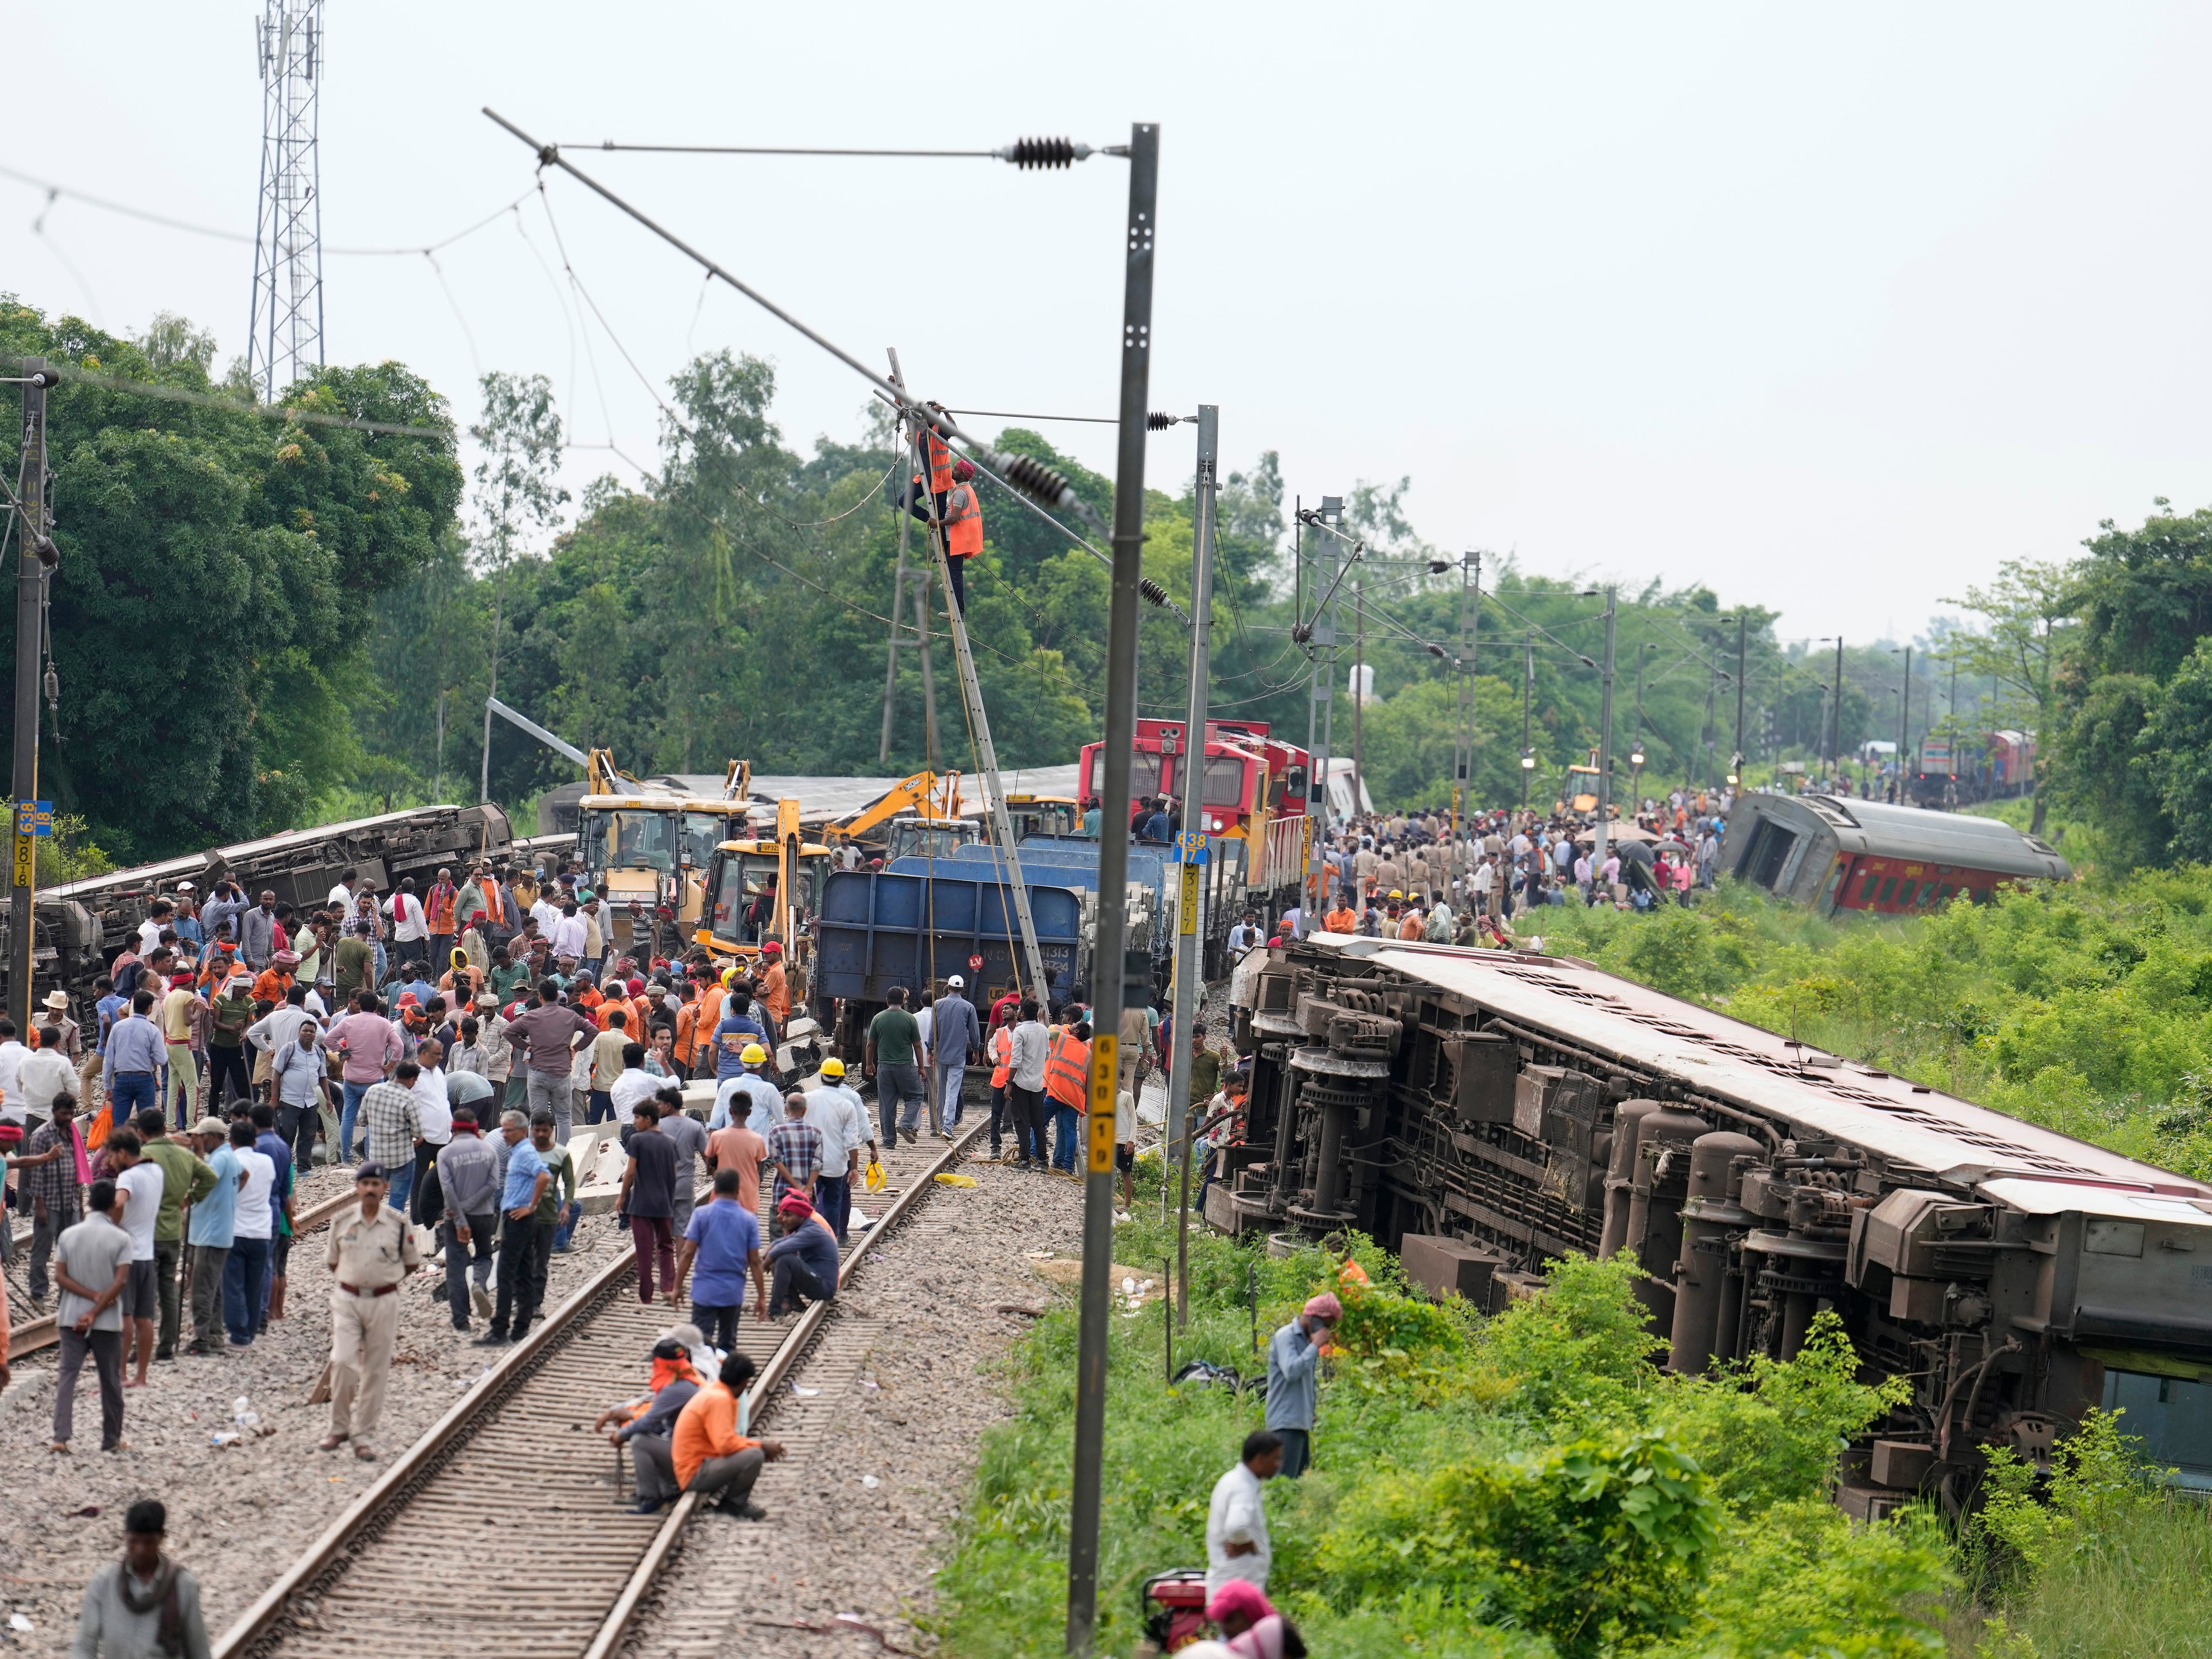 Two dead and 20 injured as passenger train derails in India